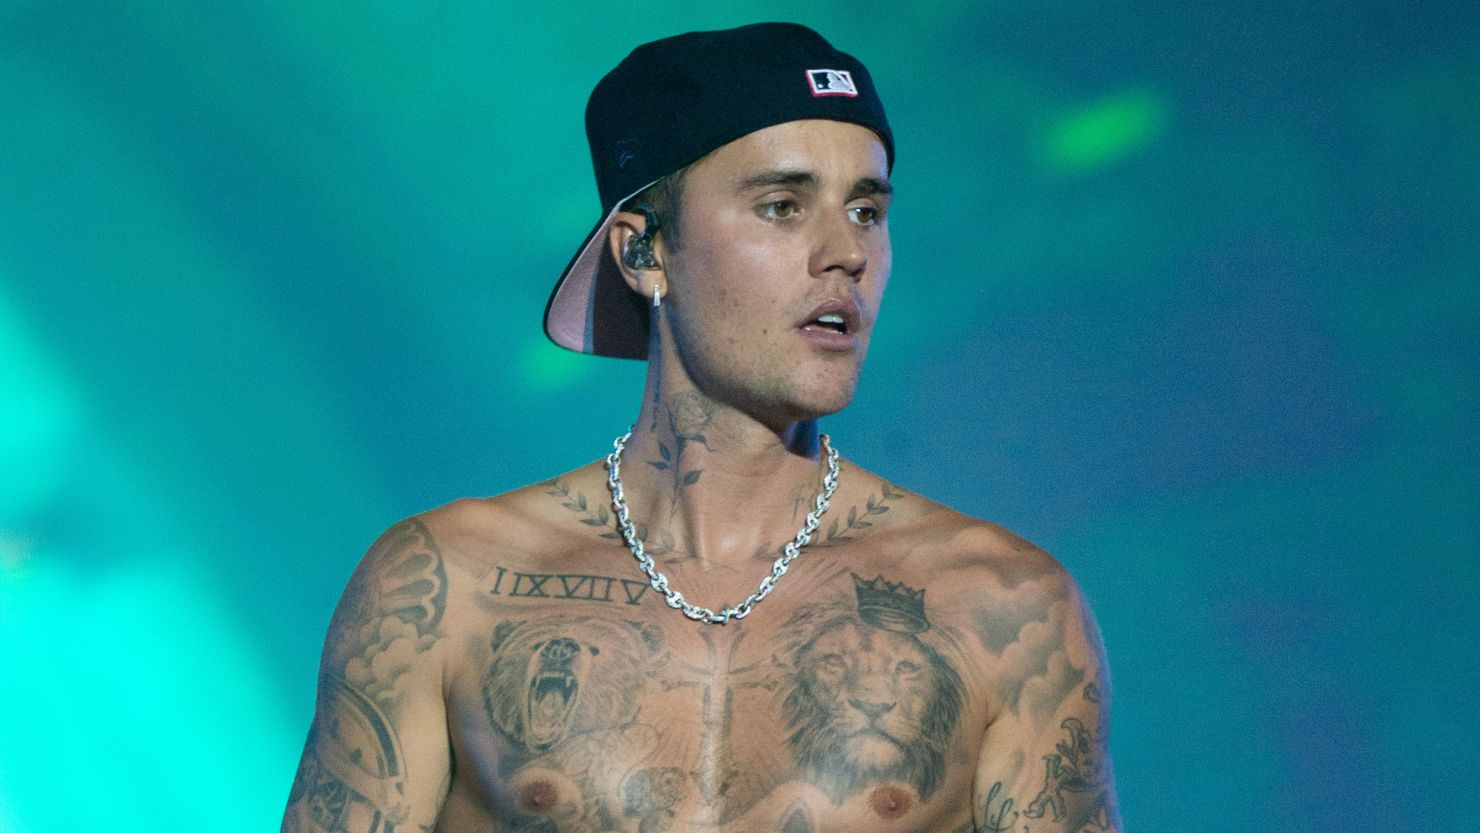 Justin Bieber’s Justice World Tour has ‘ended’ until at least March